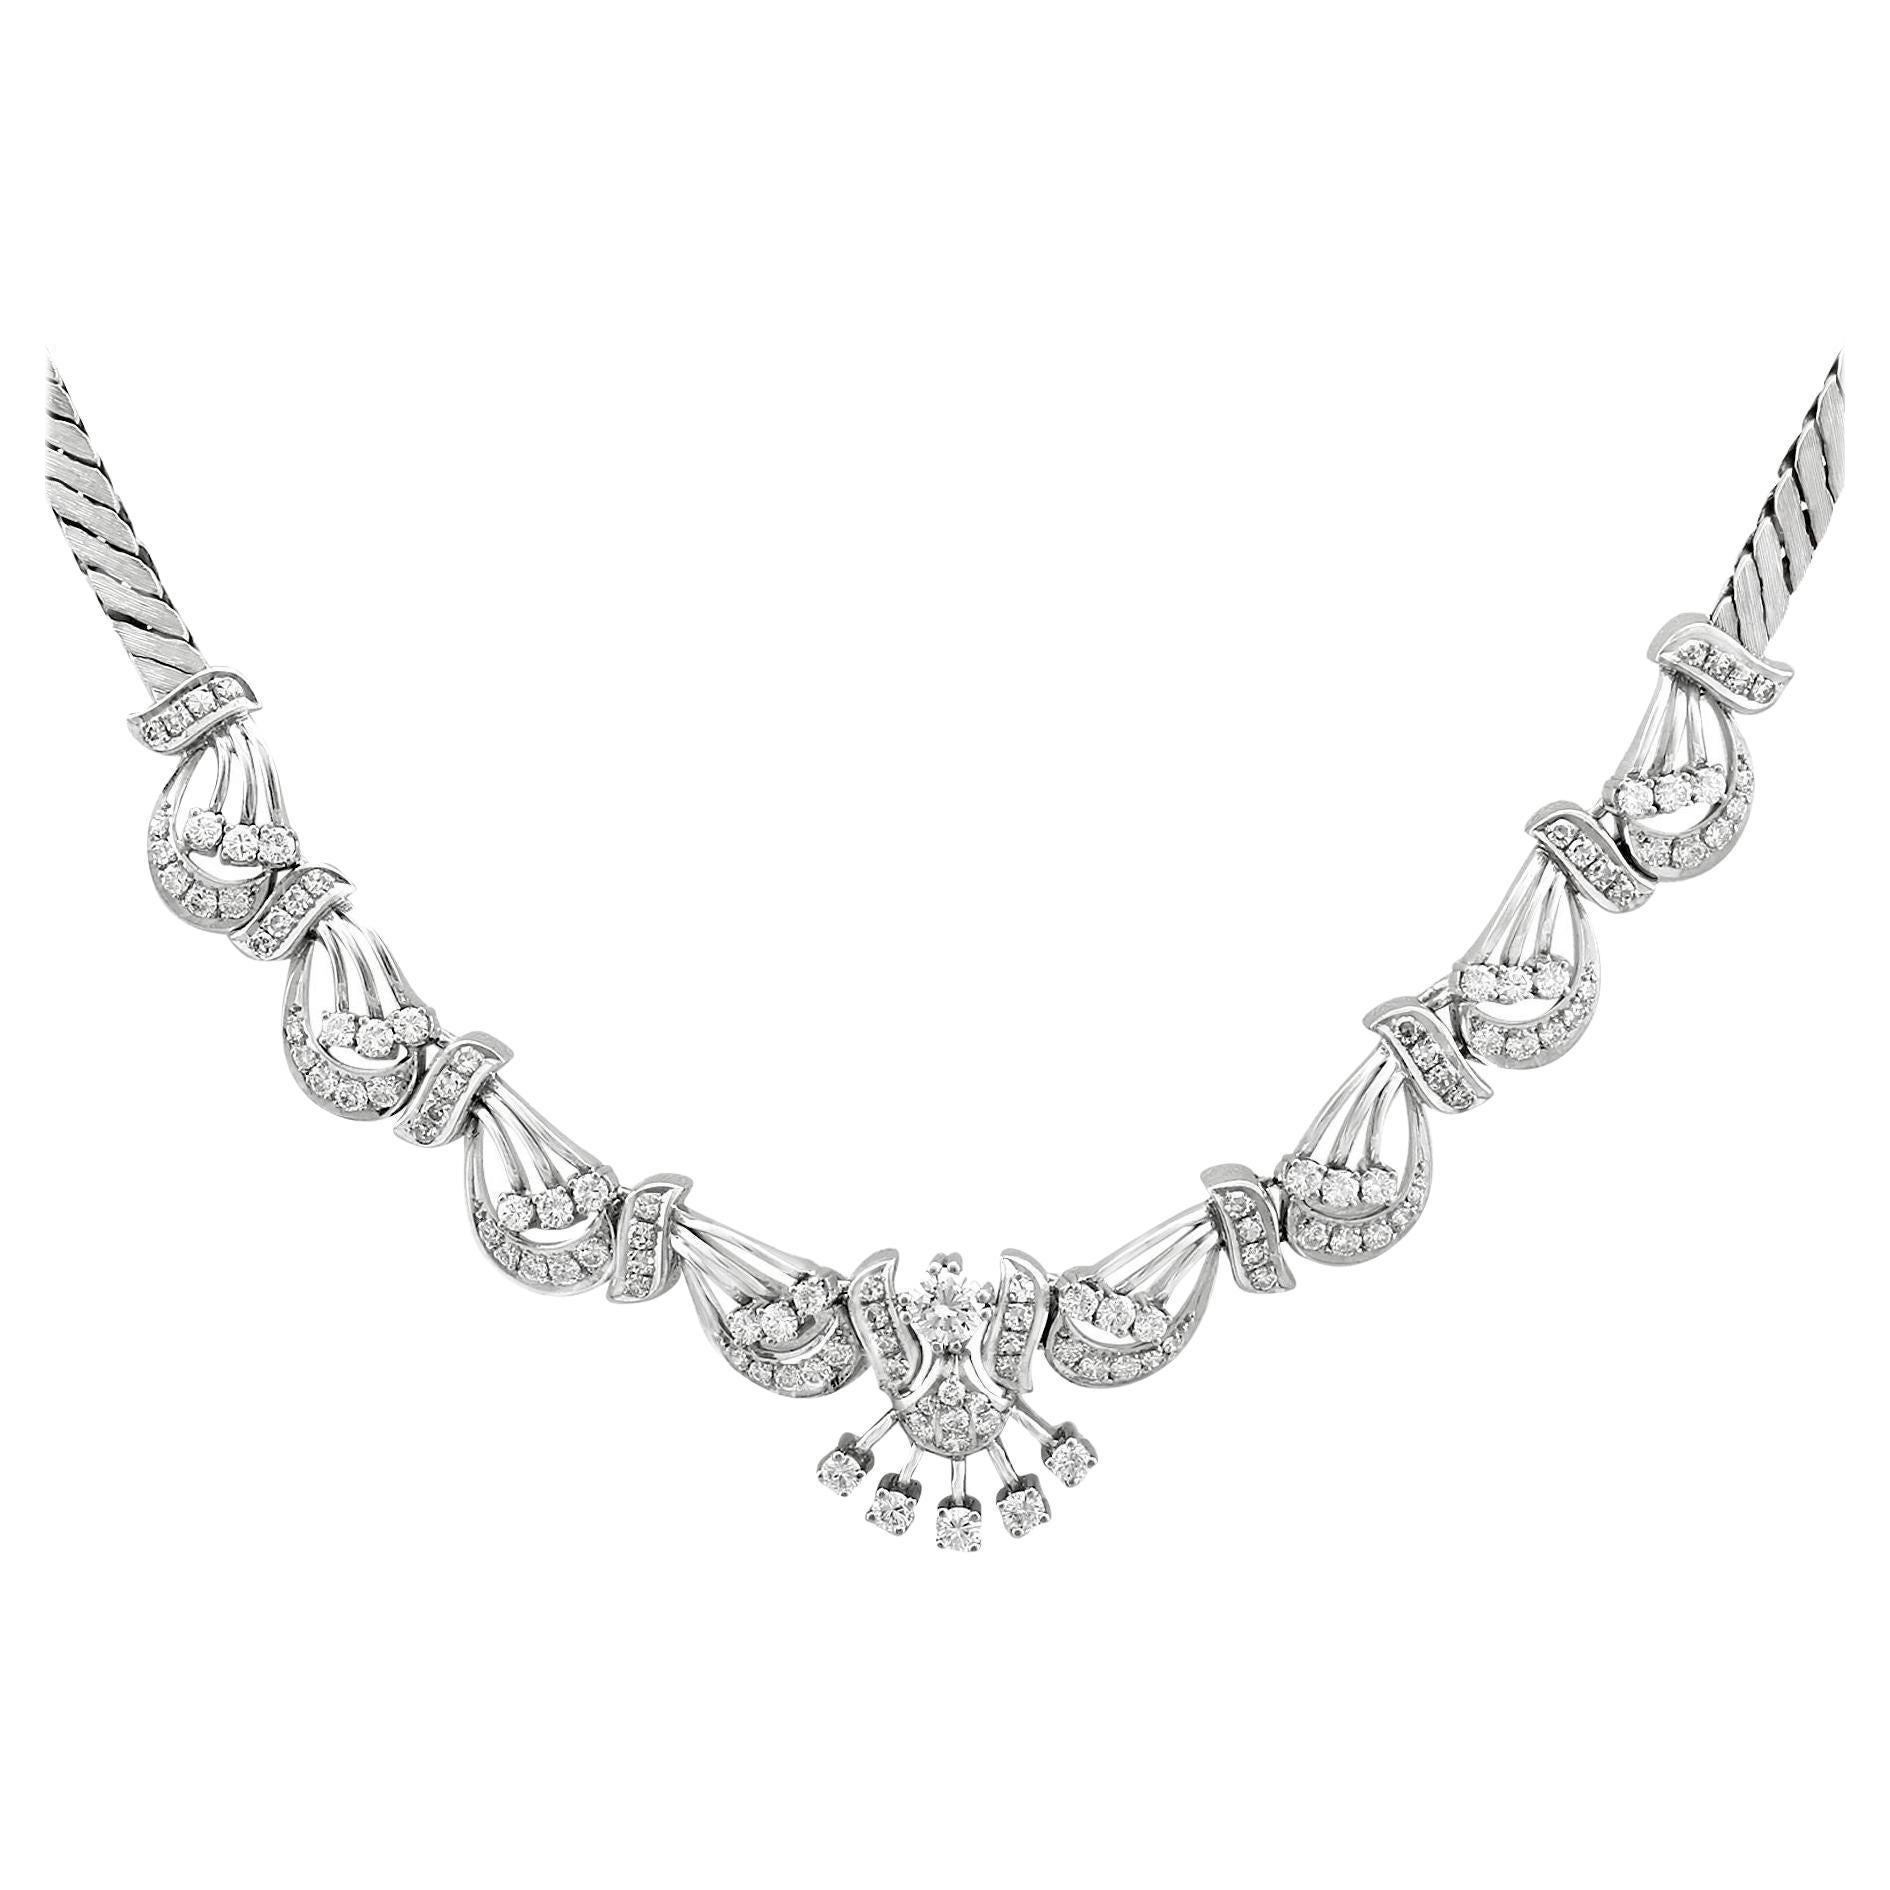 1960s Vintage 5.57 Carat Diamond and White Gold Necklace For Sale